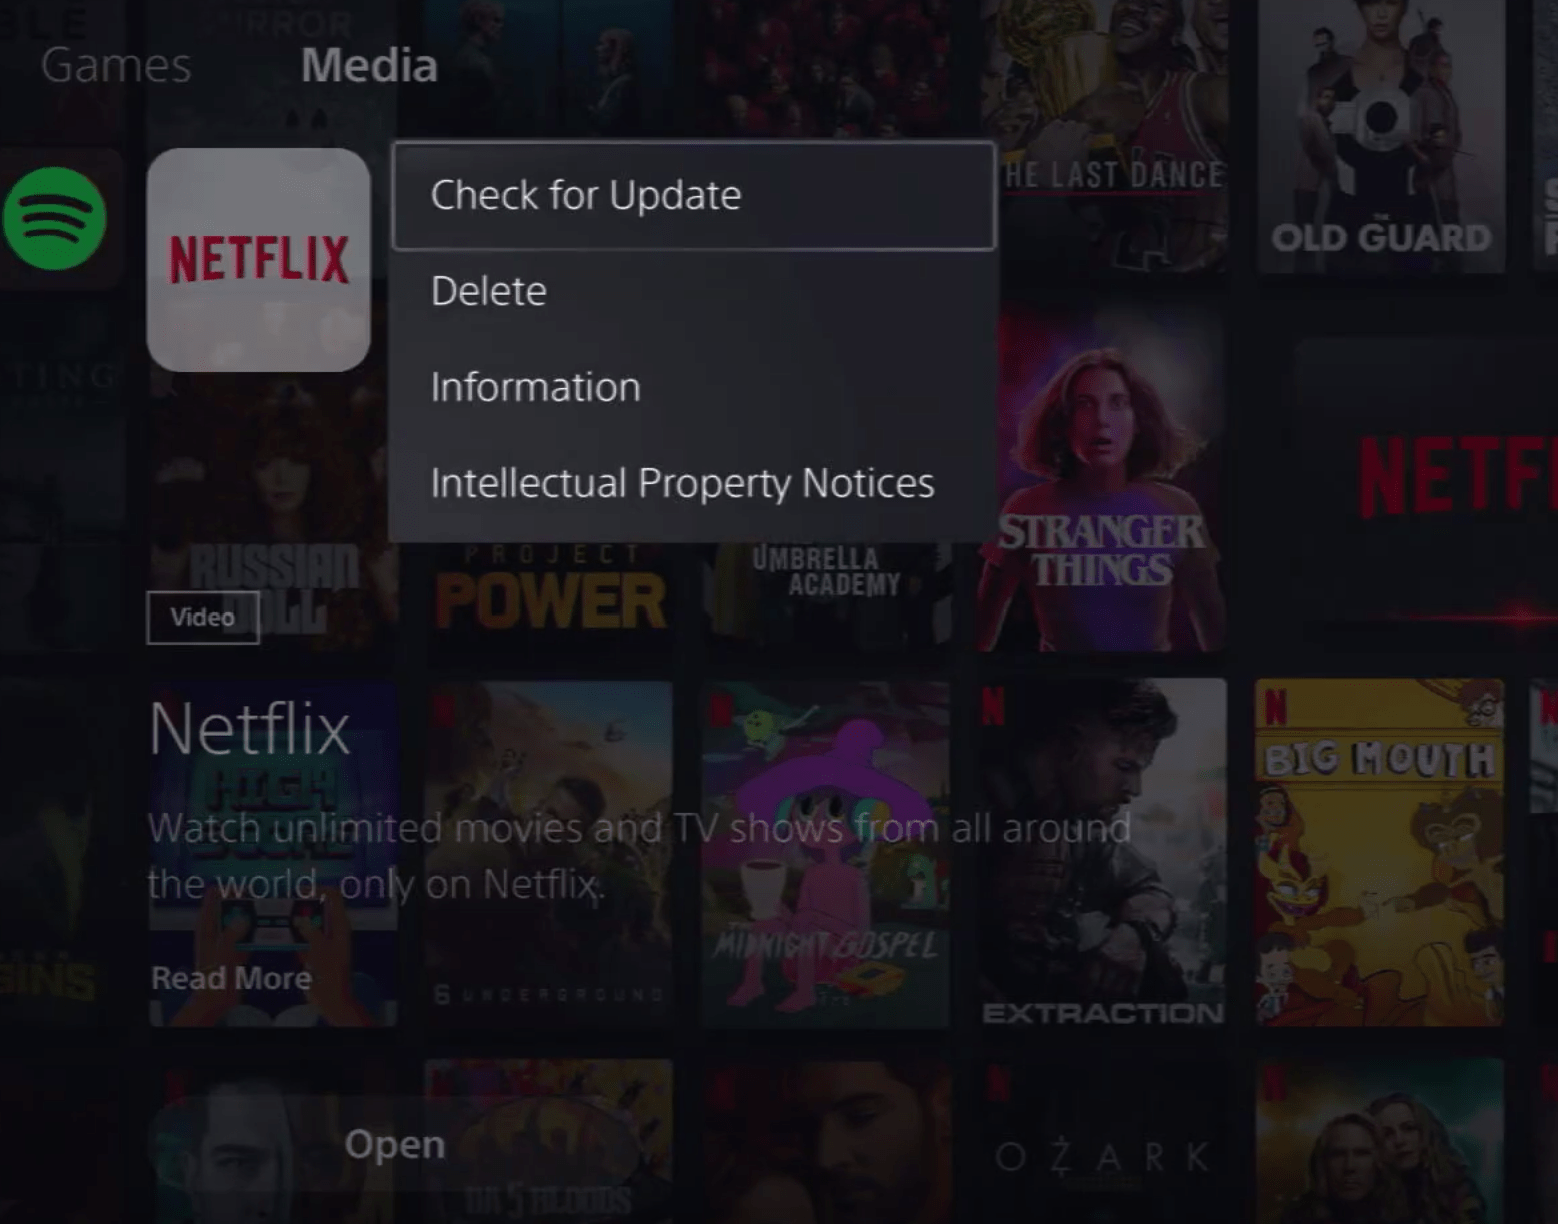 Netflix Not Working On PS5